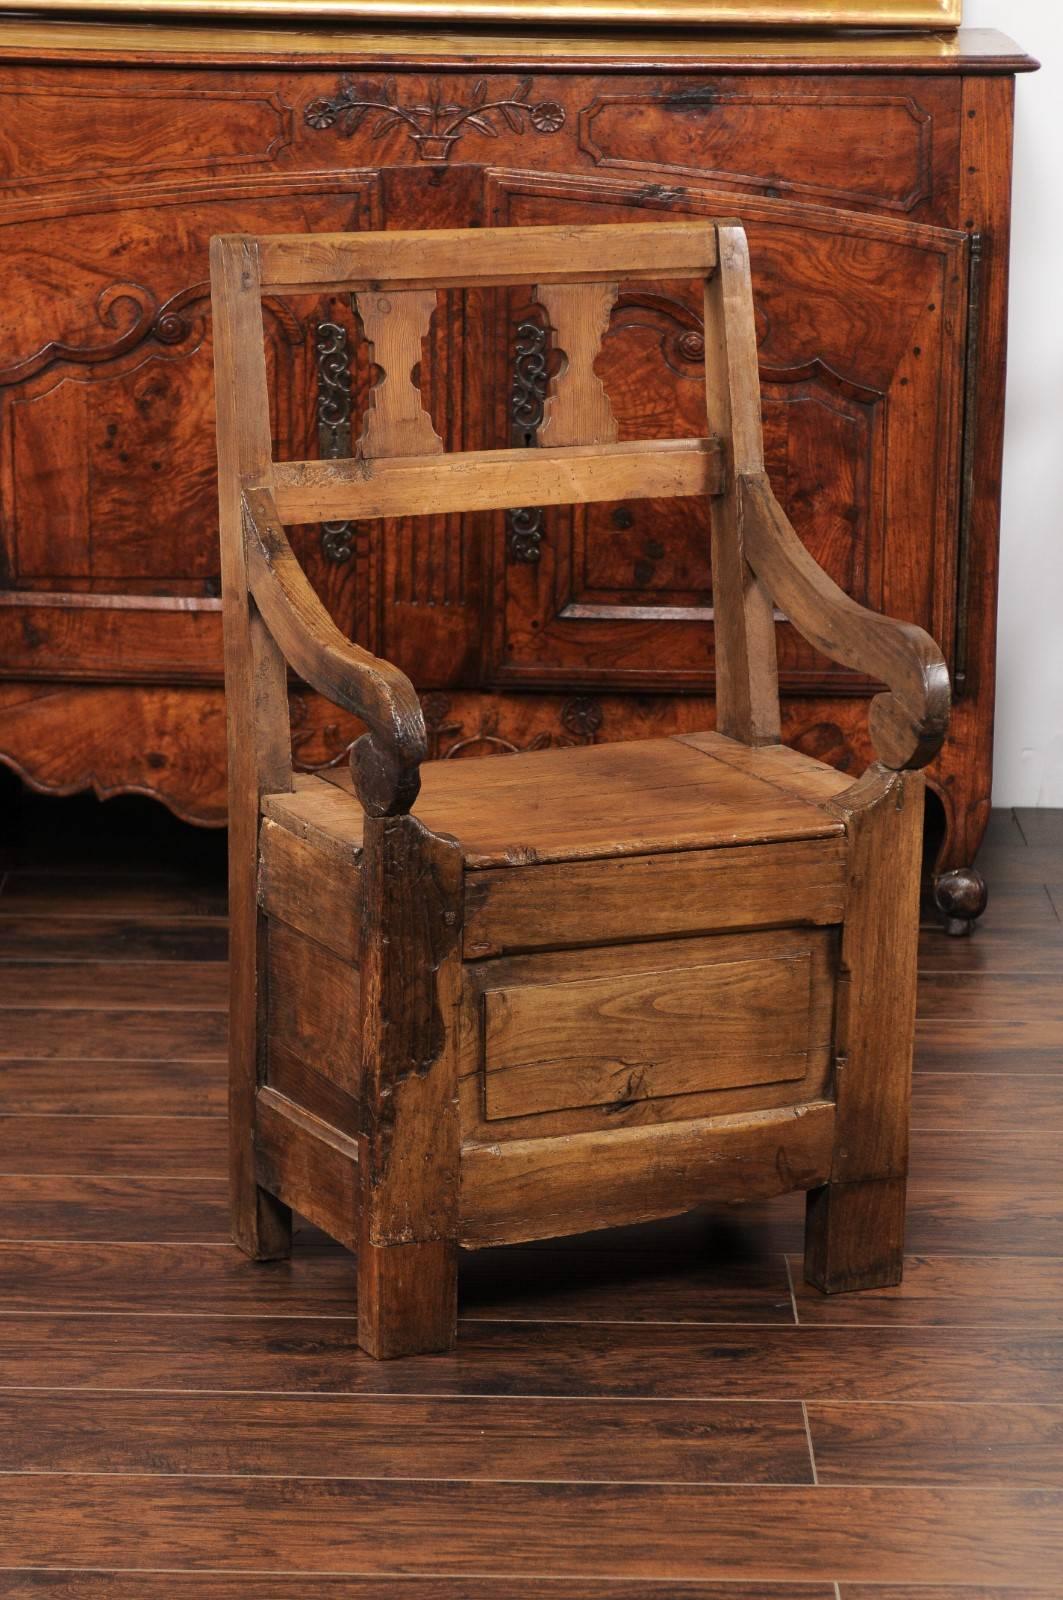 An English country pine chair from the early 19th century, with pierced back, scrolled arms and lift-top seat. This rustic country armchair features a simple pierced back, adorned with hourglass-shaped motifs. Two elegant scrolled arms connect the